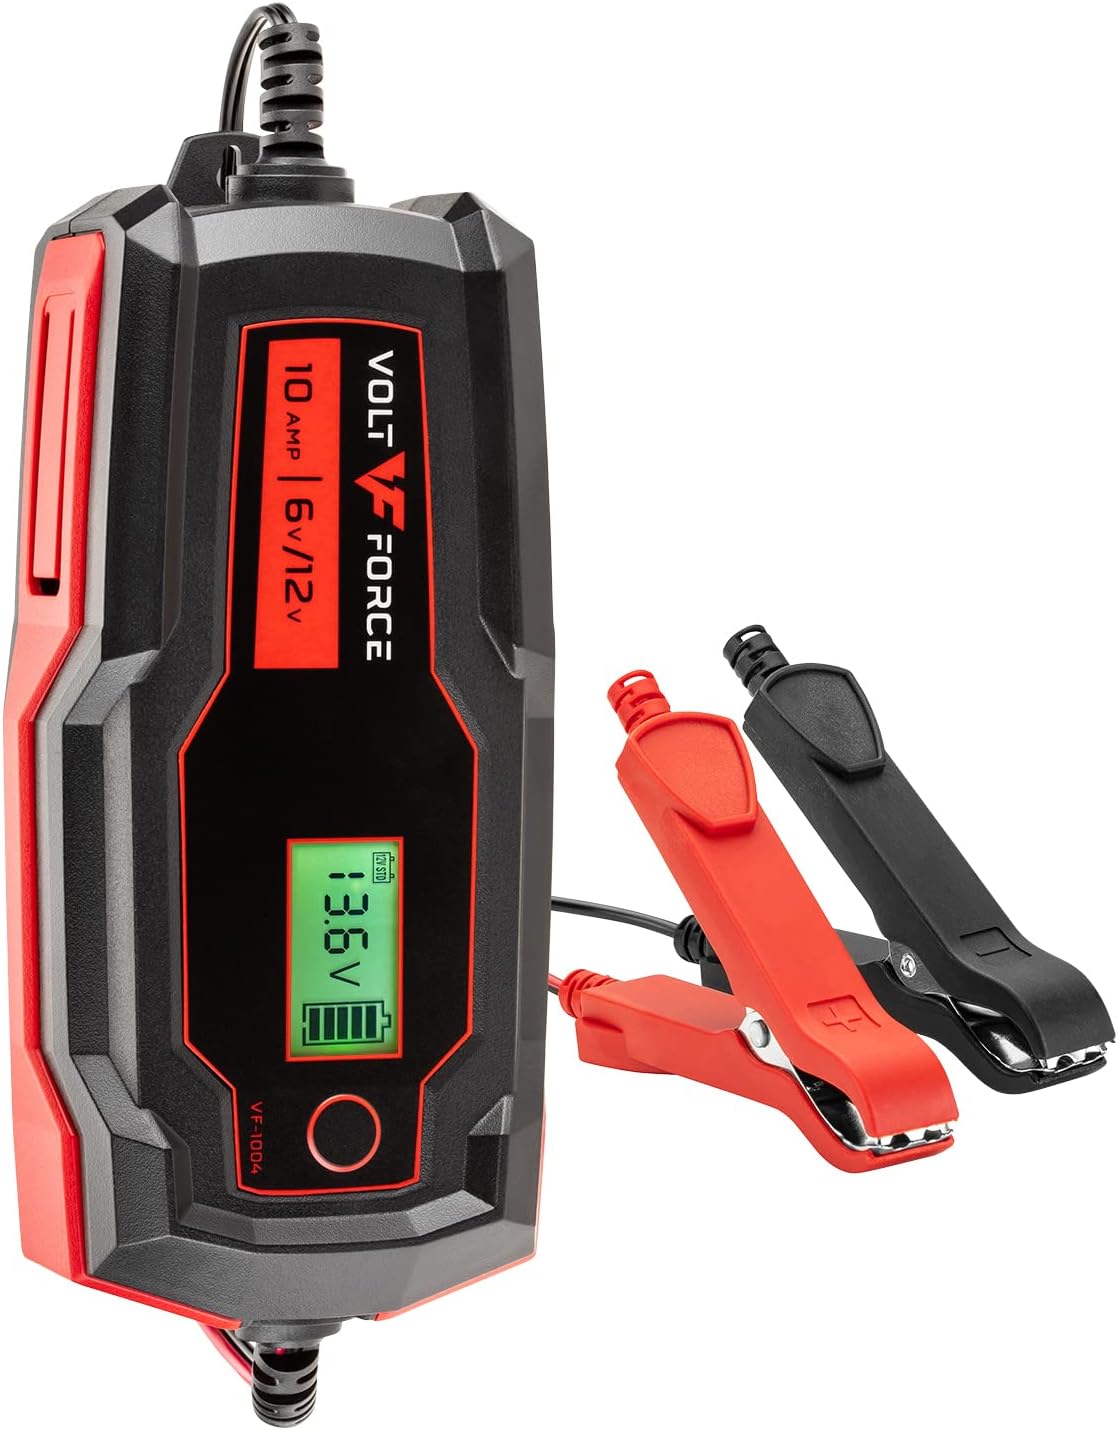 VoltForce 10A Battery Charger and Maintainer: Fully Automatic 6V and 12V Automotive Battery Charger for Cars, Motorcycle, ATVs, and More - Smart Battery Chargers VF-1004 6V & 12V 10 AMP